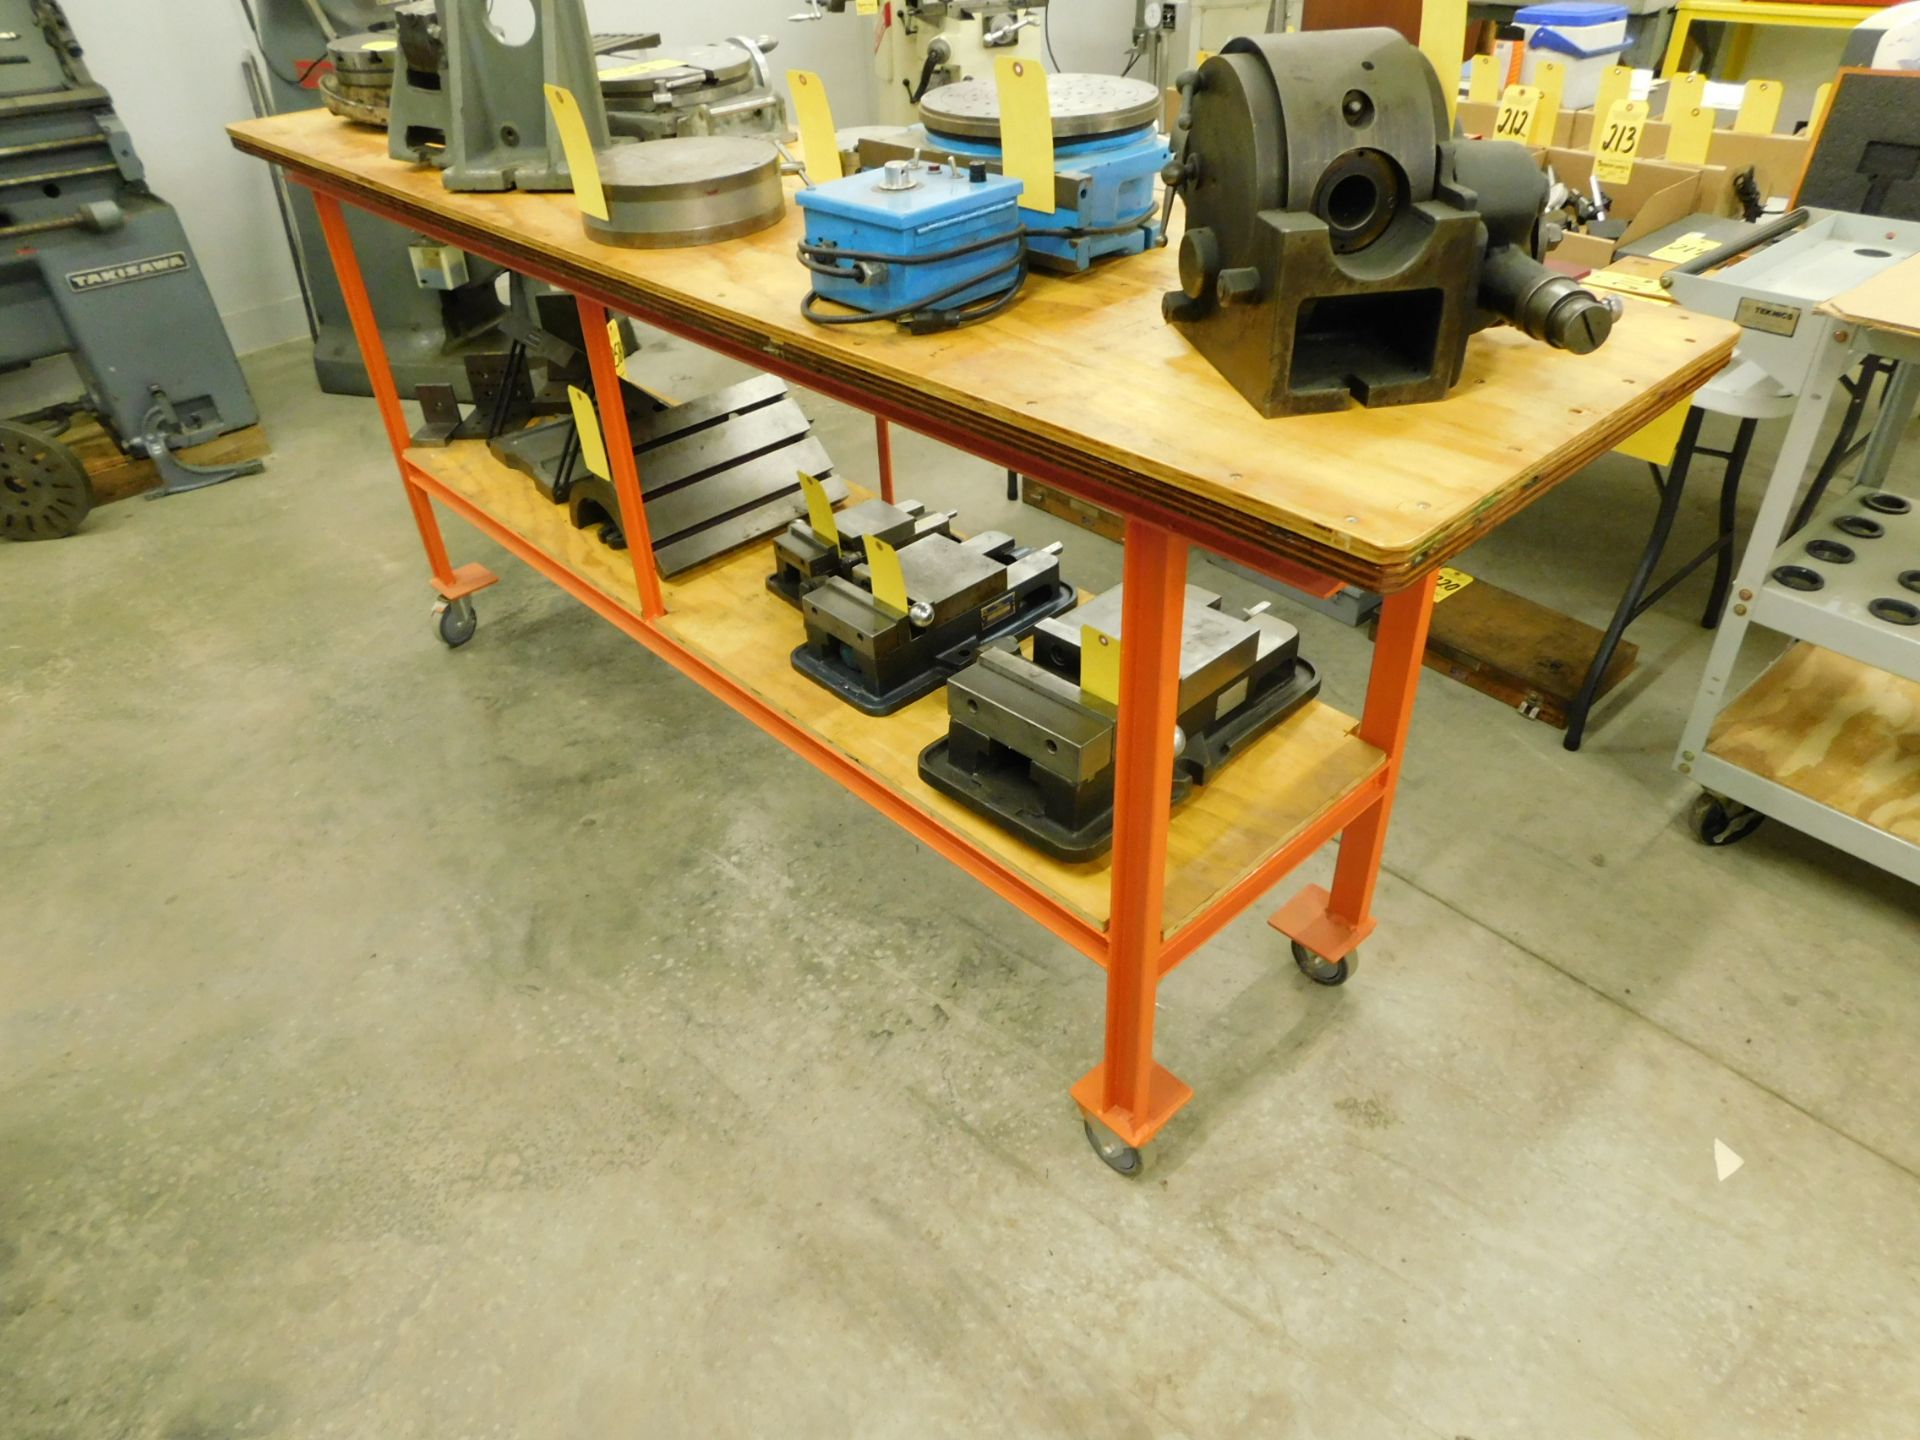 Heavy Duty Shop Table on Casters, 2' x 8' x 41" H with 1 1/2" Thick Wooden Top and Lower Shelf